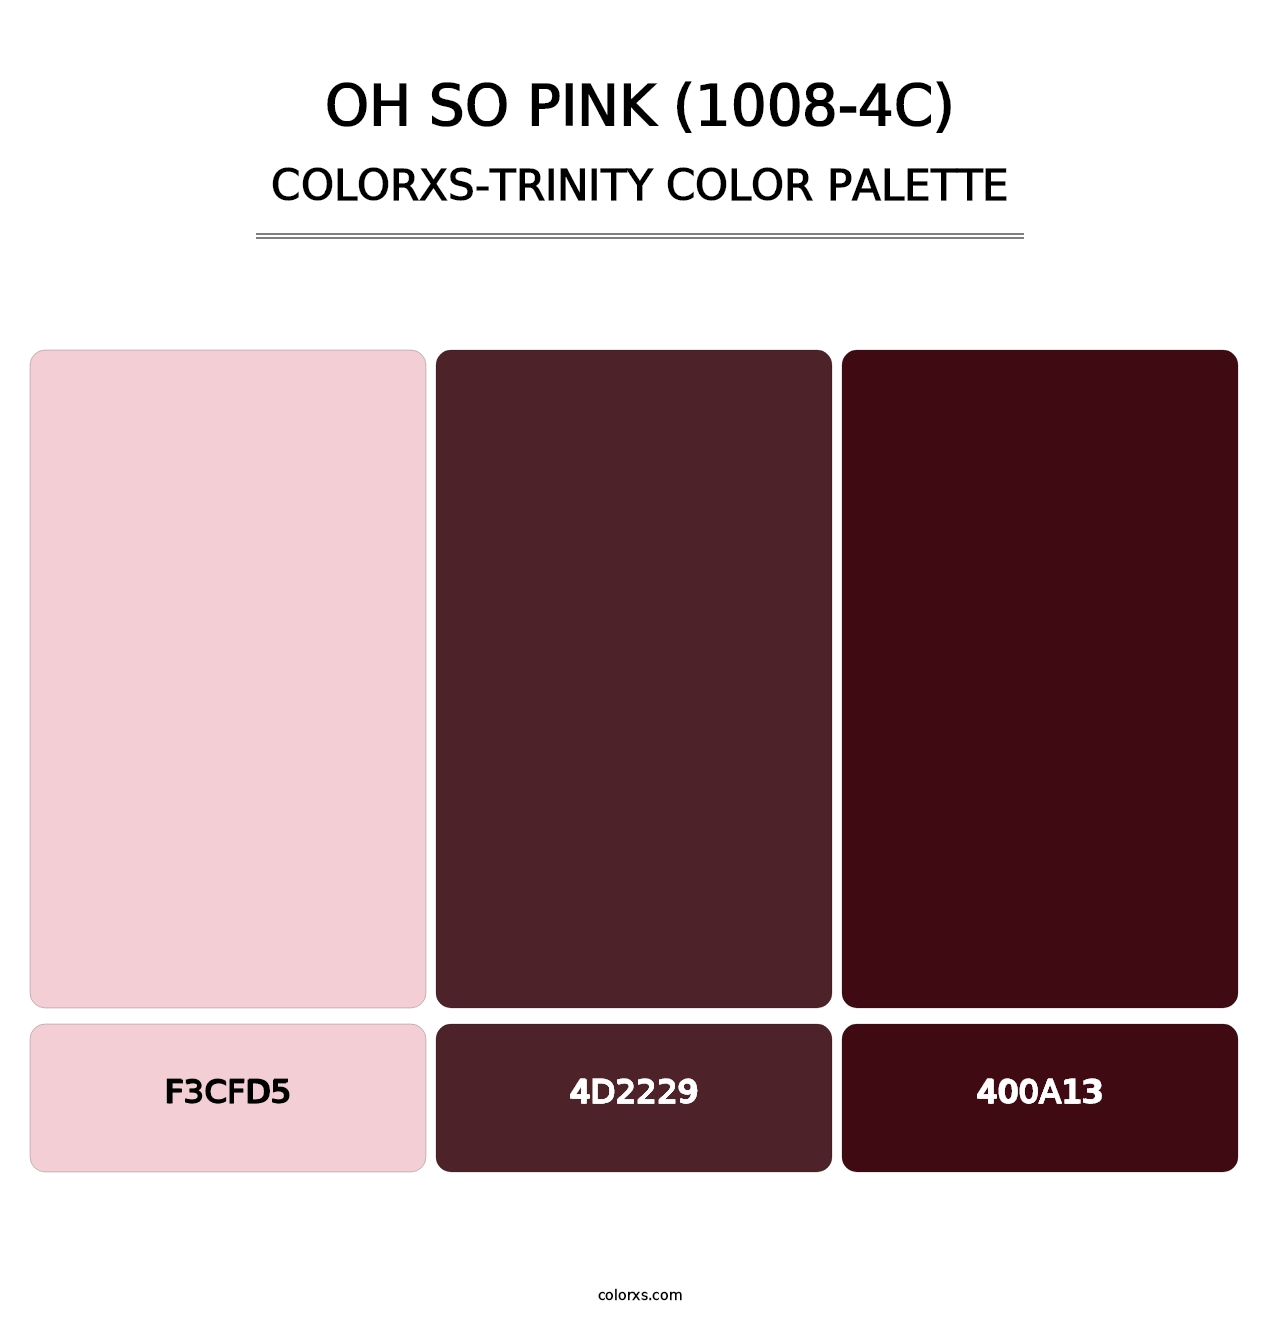 Oh So Pink (1008-4C) - Colorxs Trinity Palette